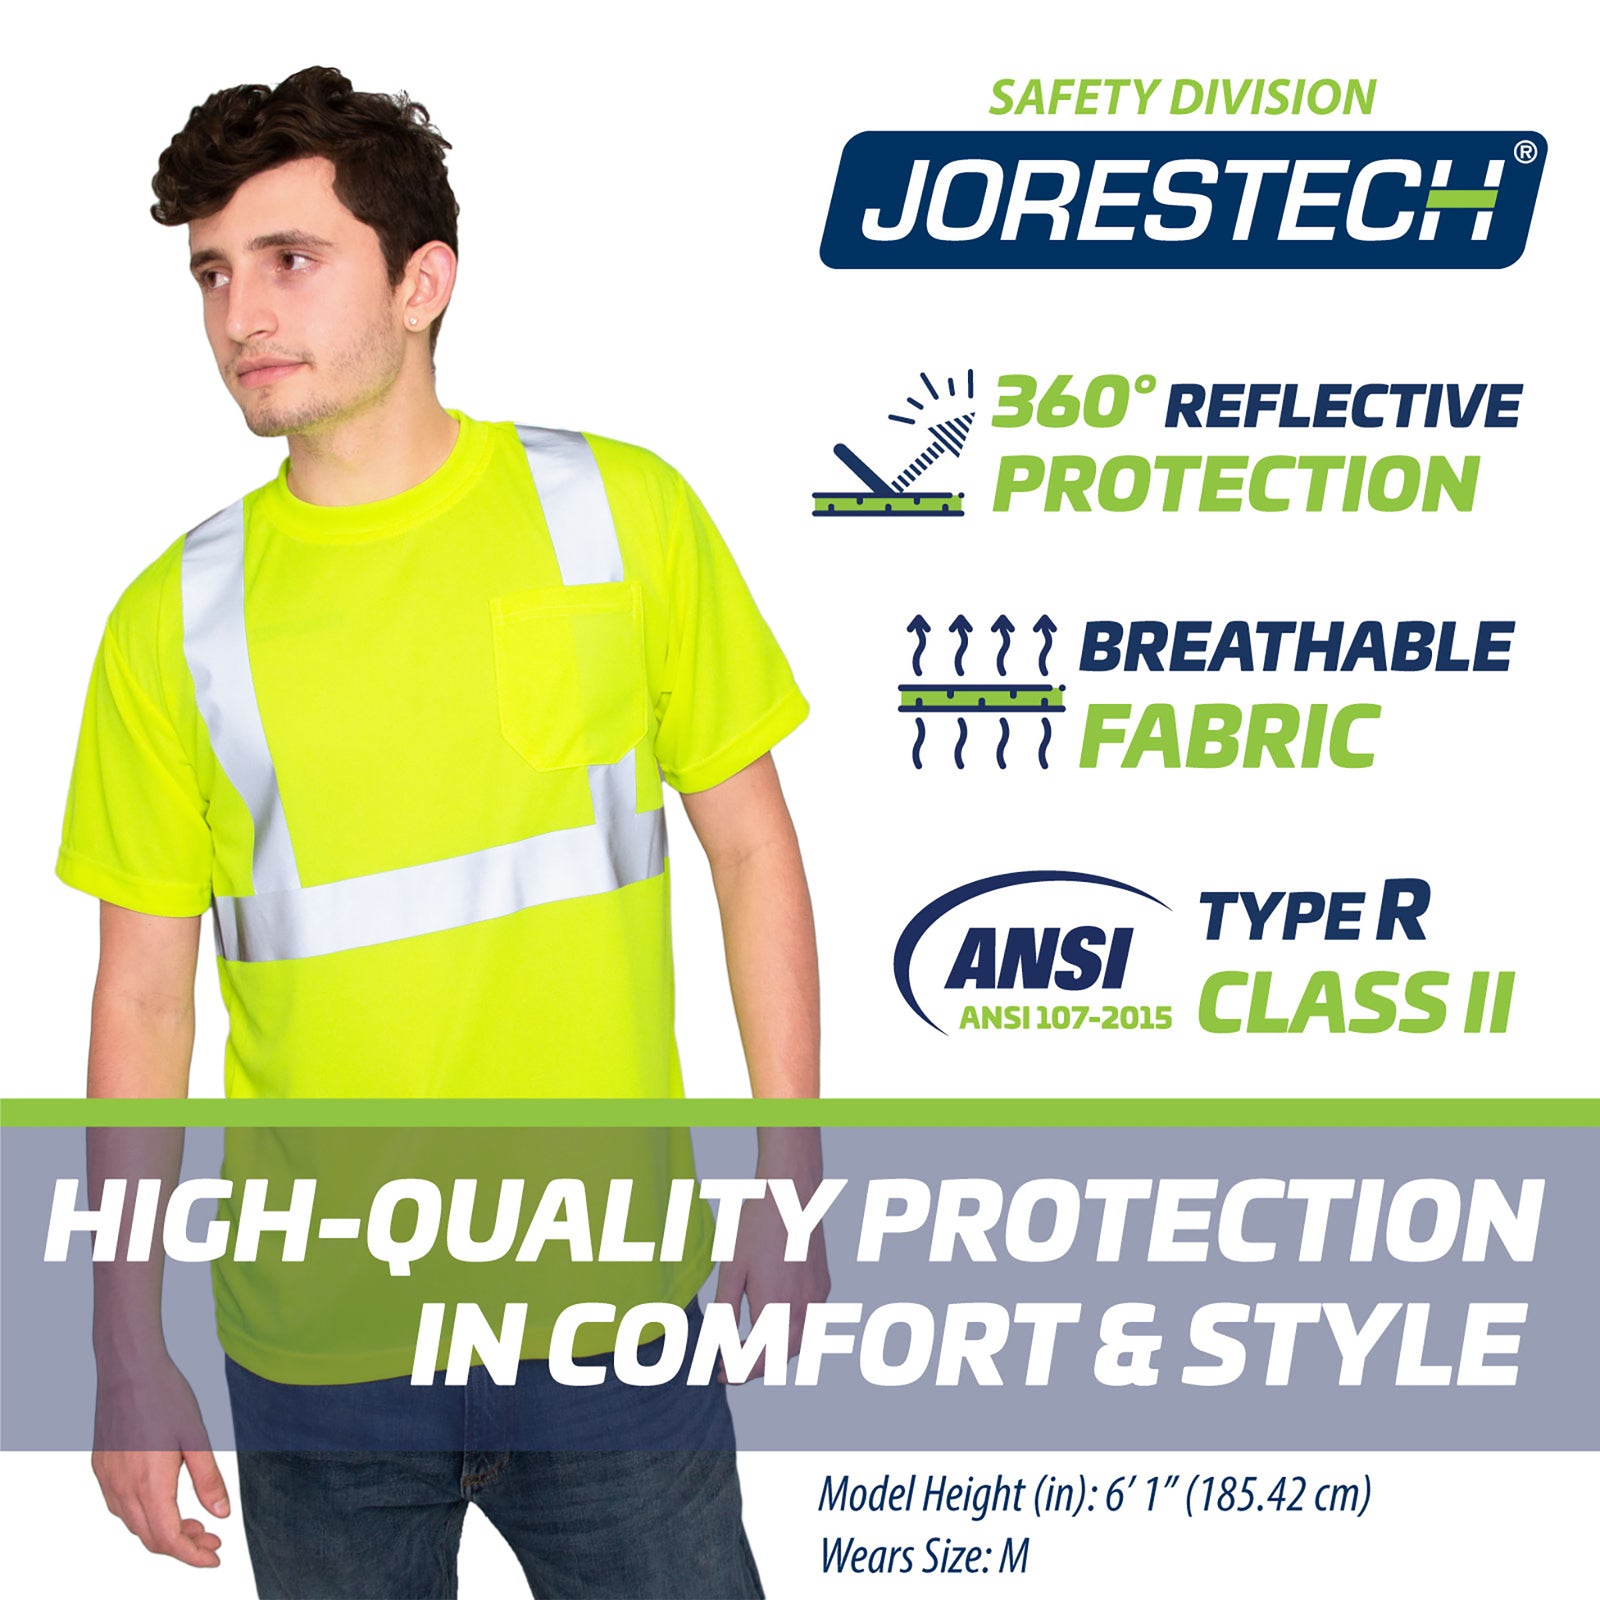 A man wearing the yellow JORESTECH hi vis reflective safety pocket shirt and blue and green icons that mention 360 degrees reflective protection, breathable fabric,, ANSI type R class 2 , high quality protection in comfort and style